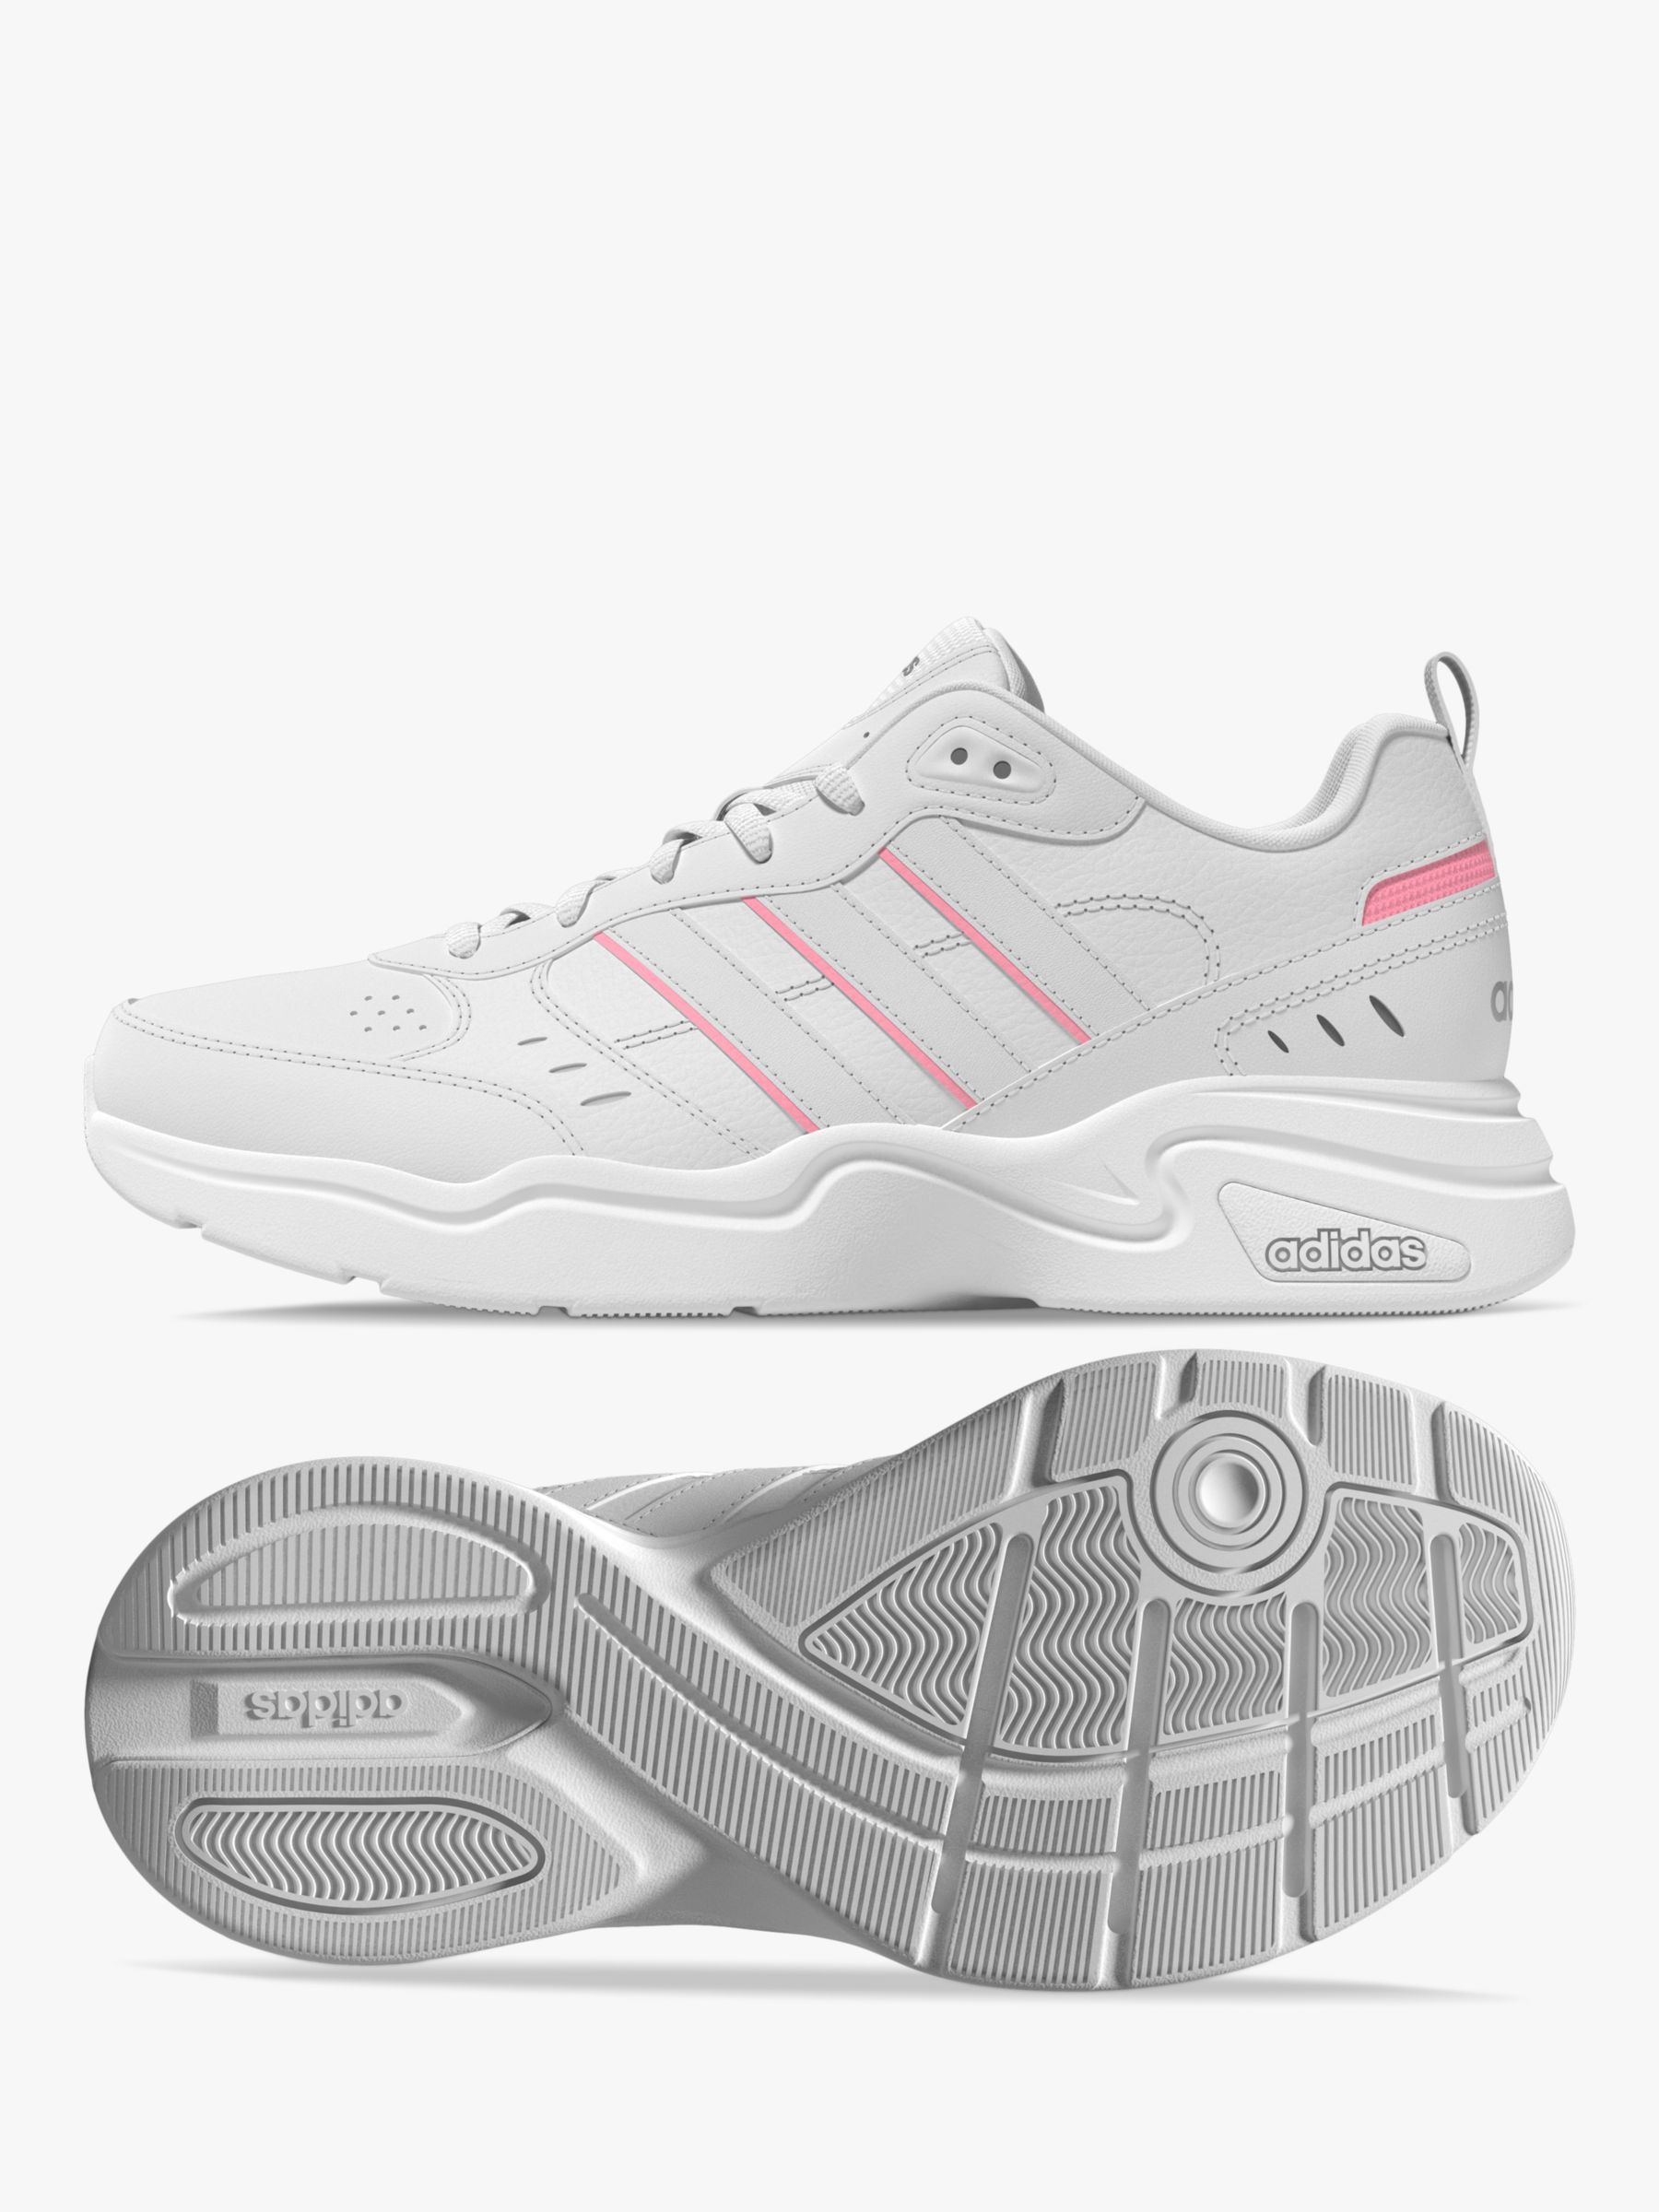 Buy adidas Strutter Women's Trainers, White/Pink Online at johnlewis.com